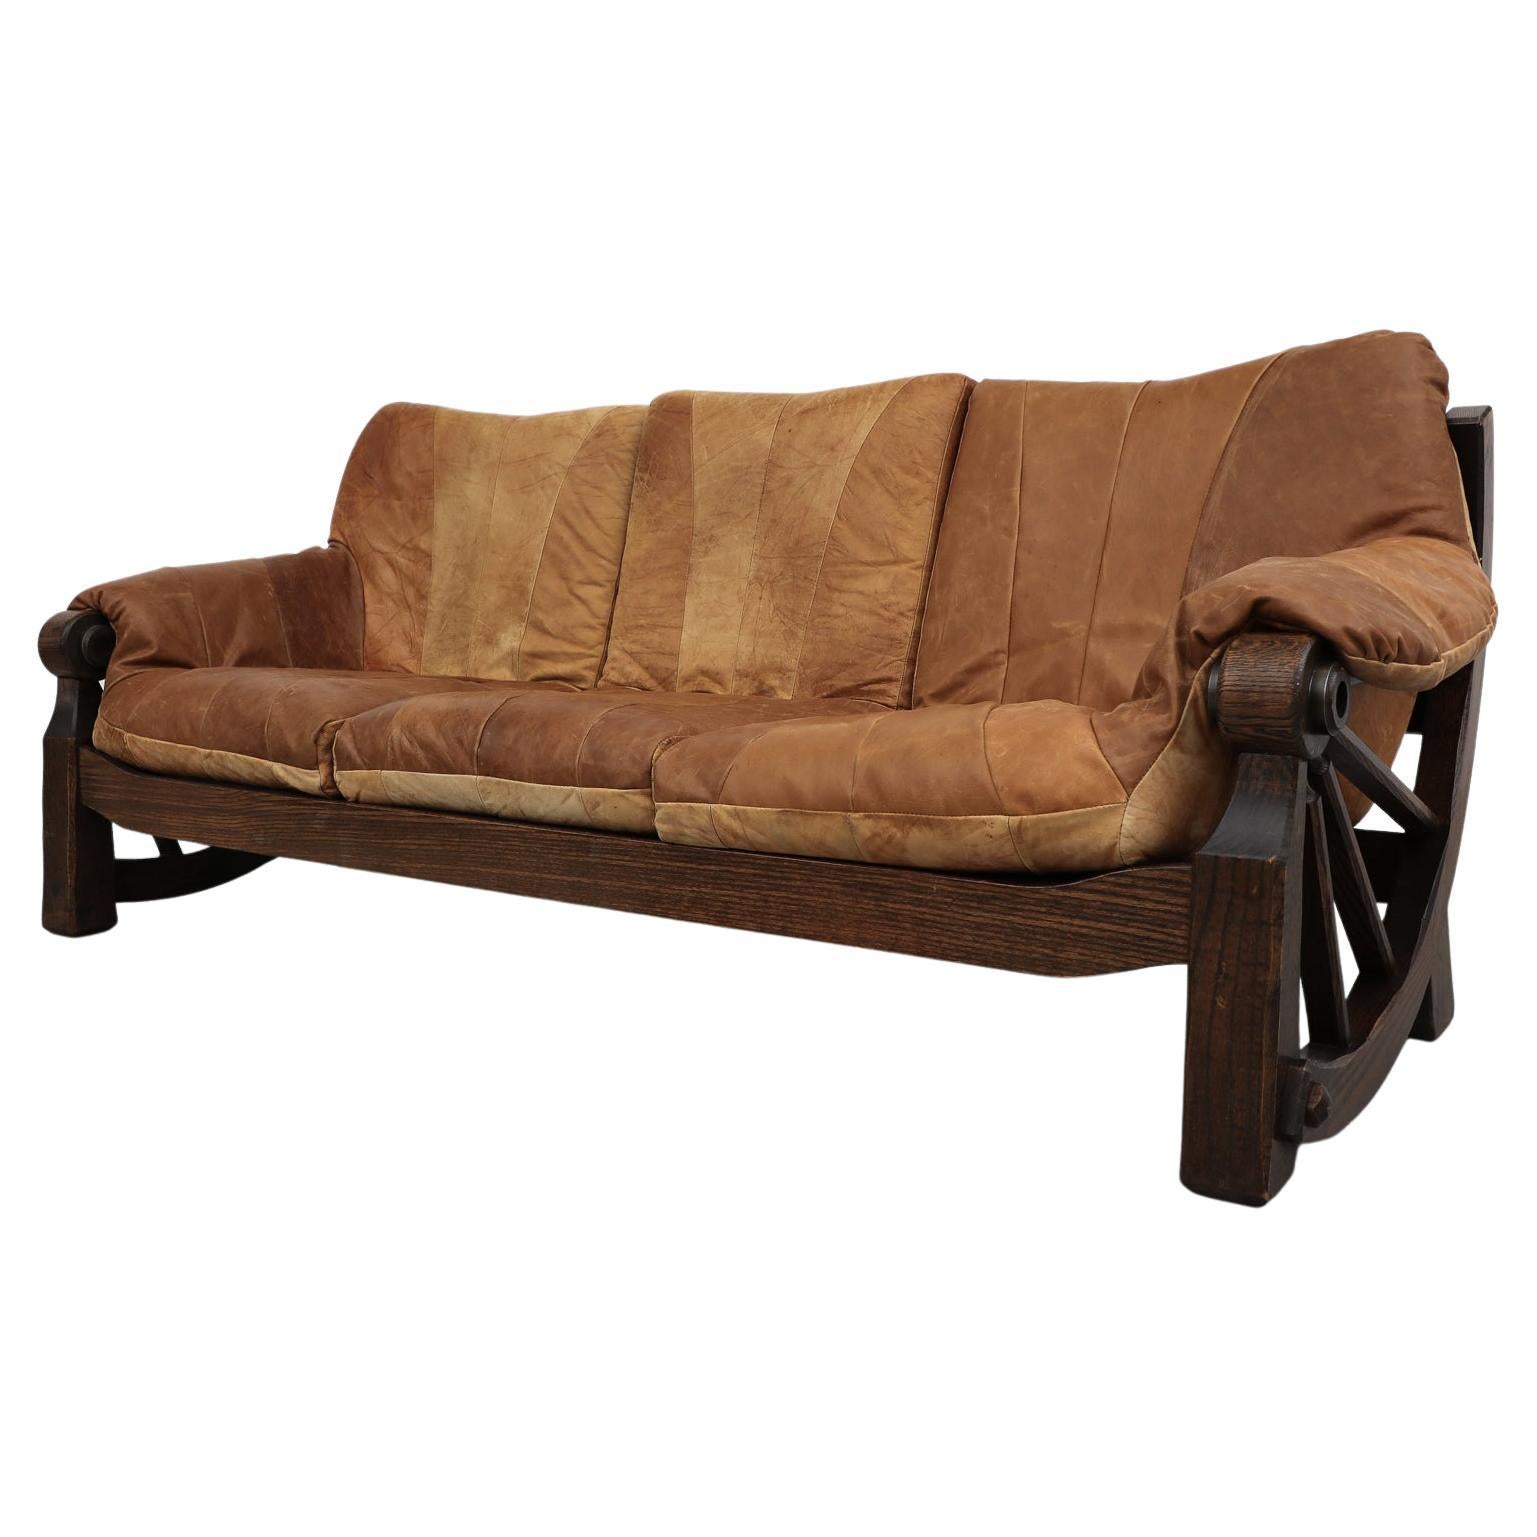 Mid-Century Brutalist Leather Patchwork Sofa with Bonanza Wood Frame For Sale